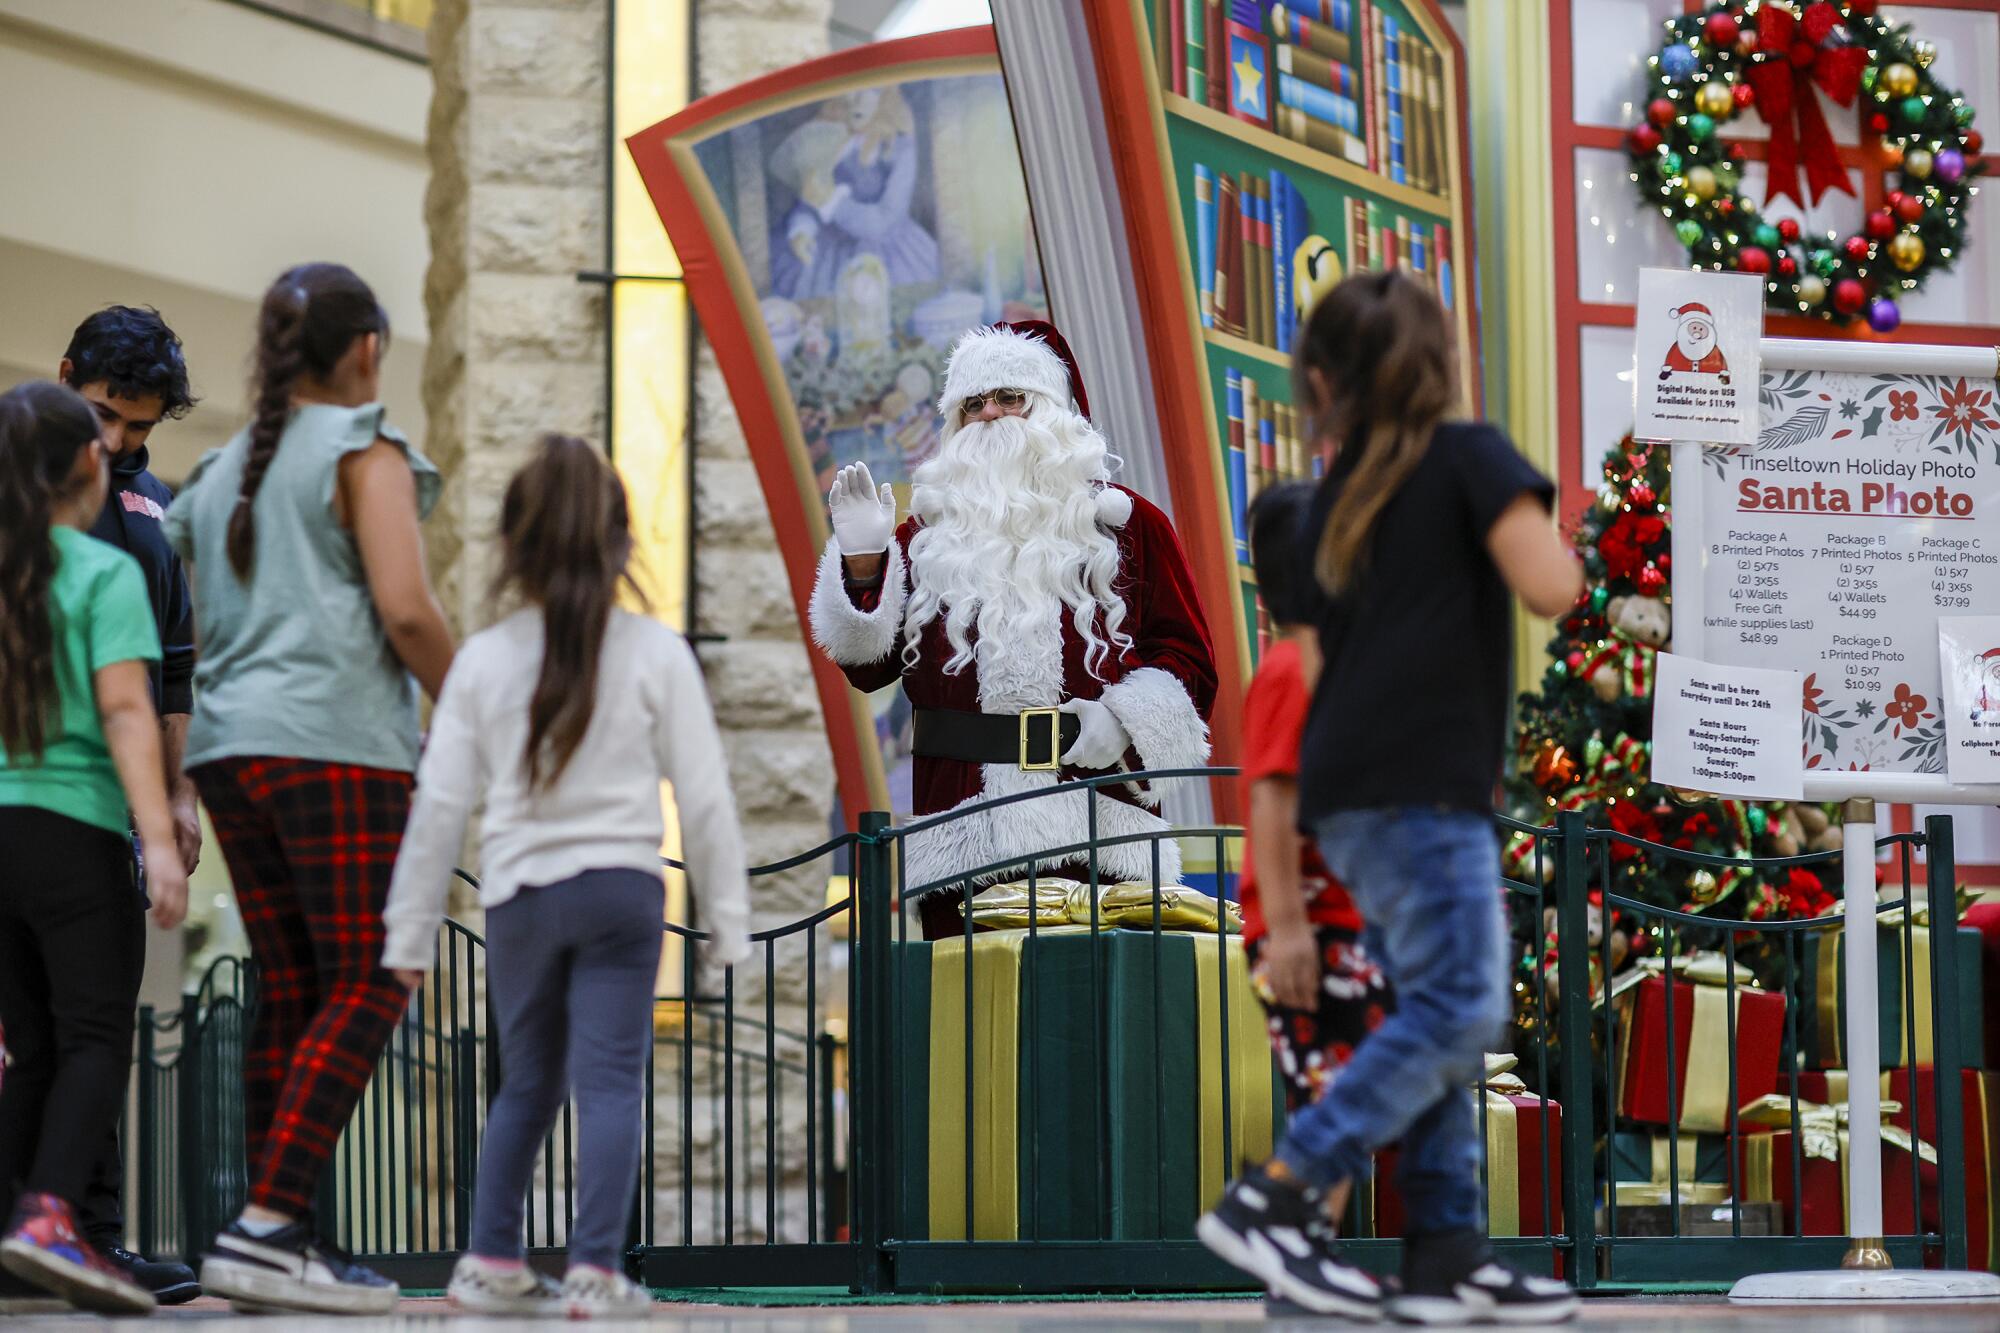 Santa greets the Herrera family as they prepare for a photo session at the Puente Hills Mall.